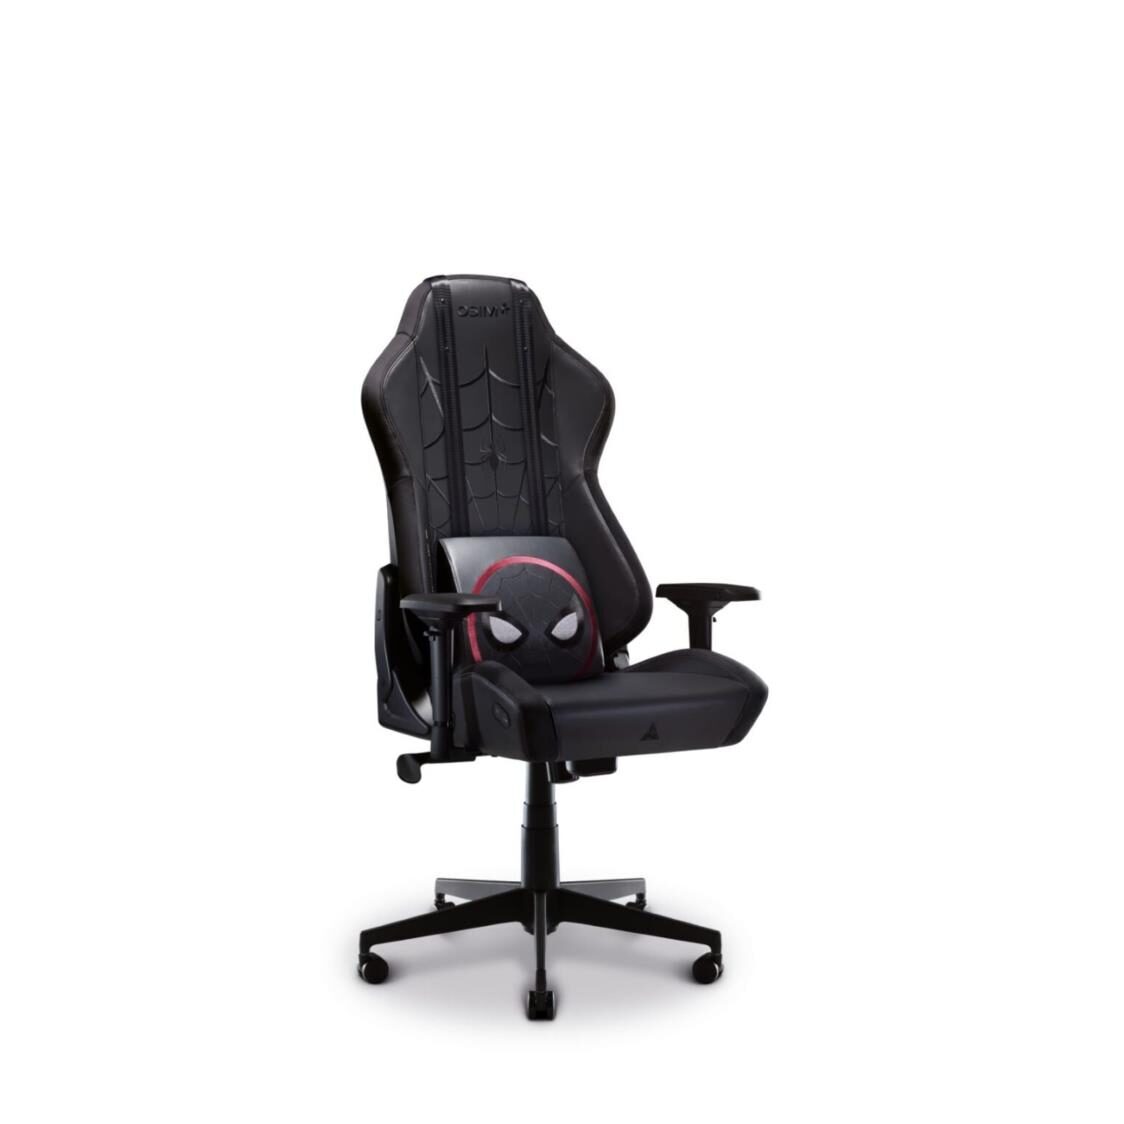 UTHONE S GAMING CHAIR - SPIDER MAN PRE-ASSEMBLED